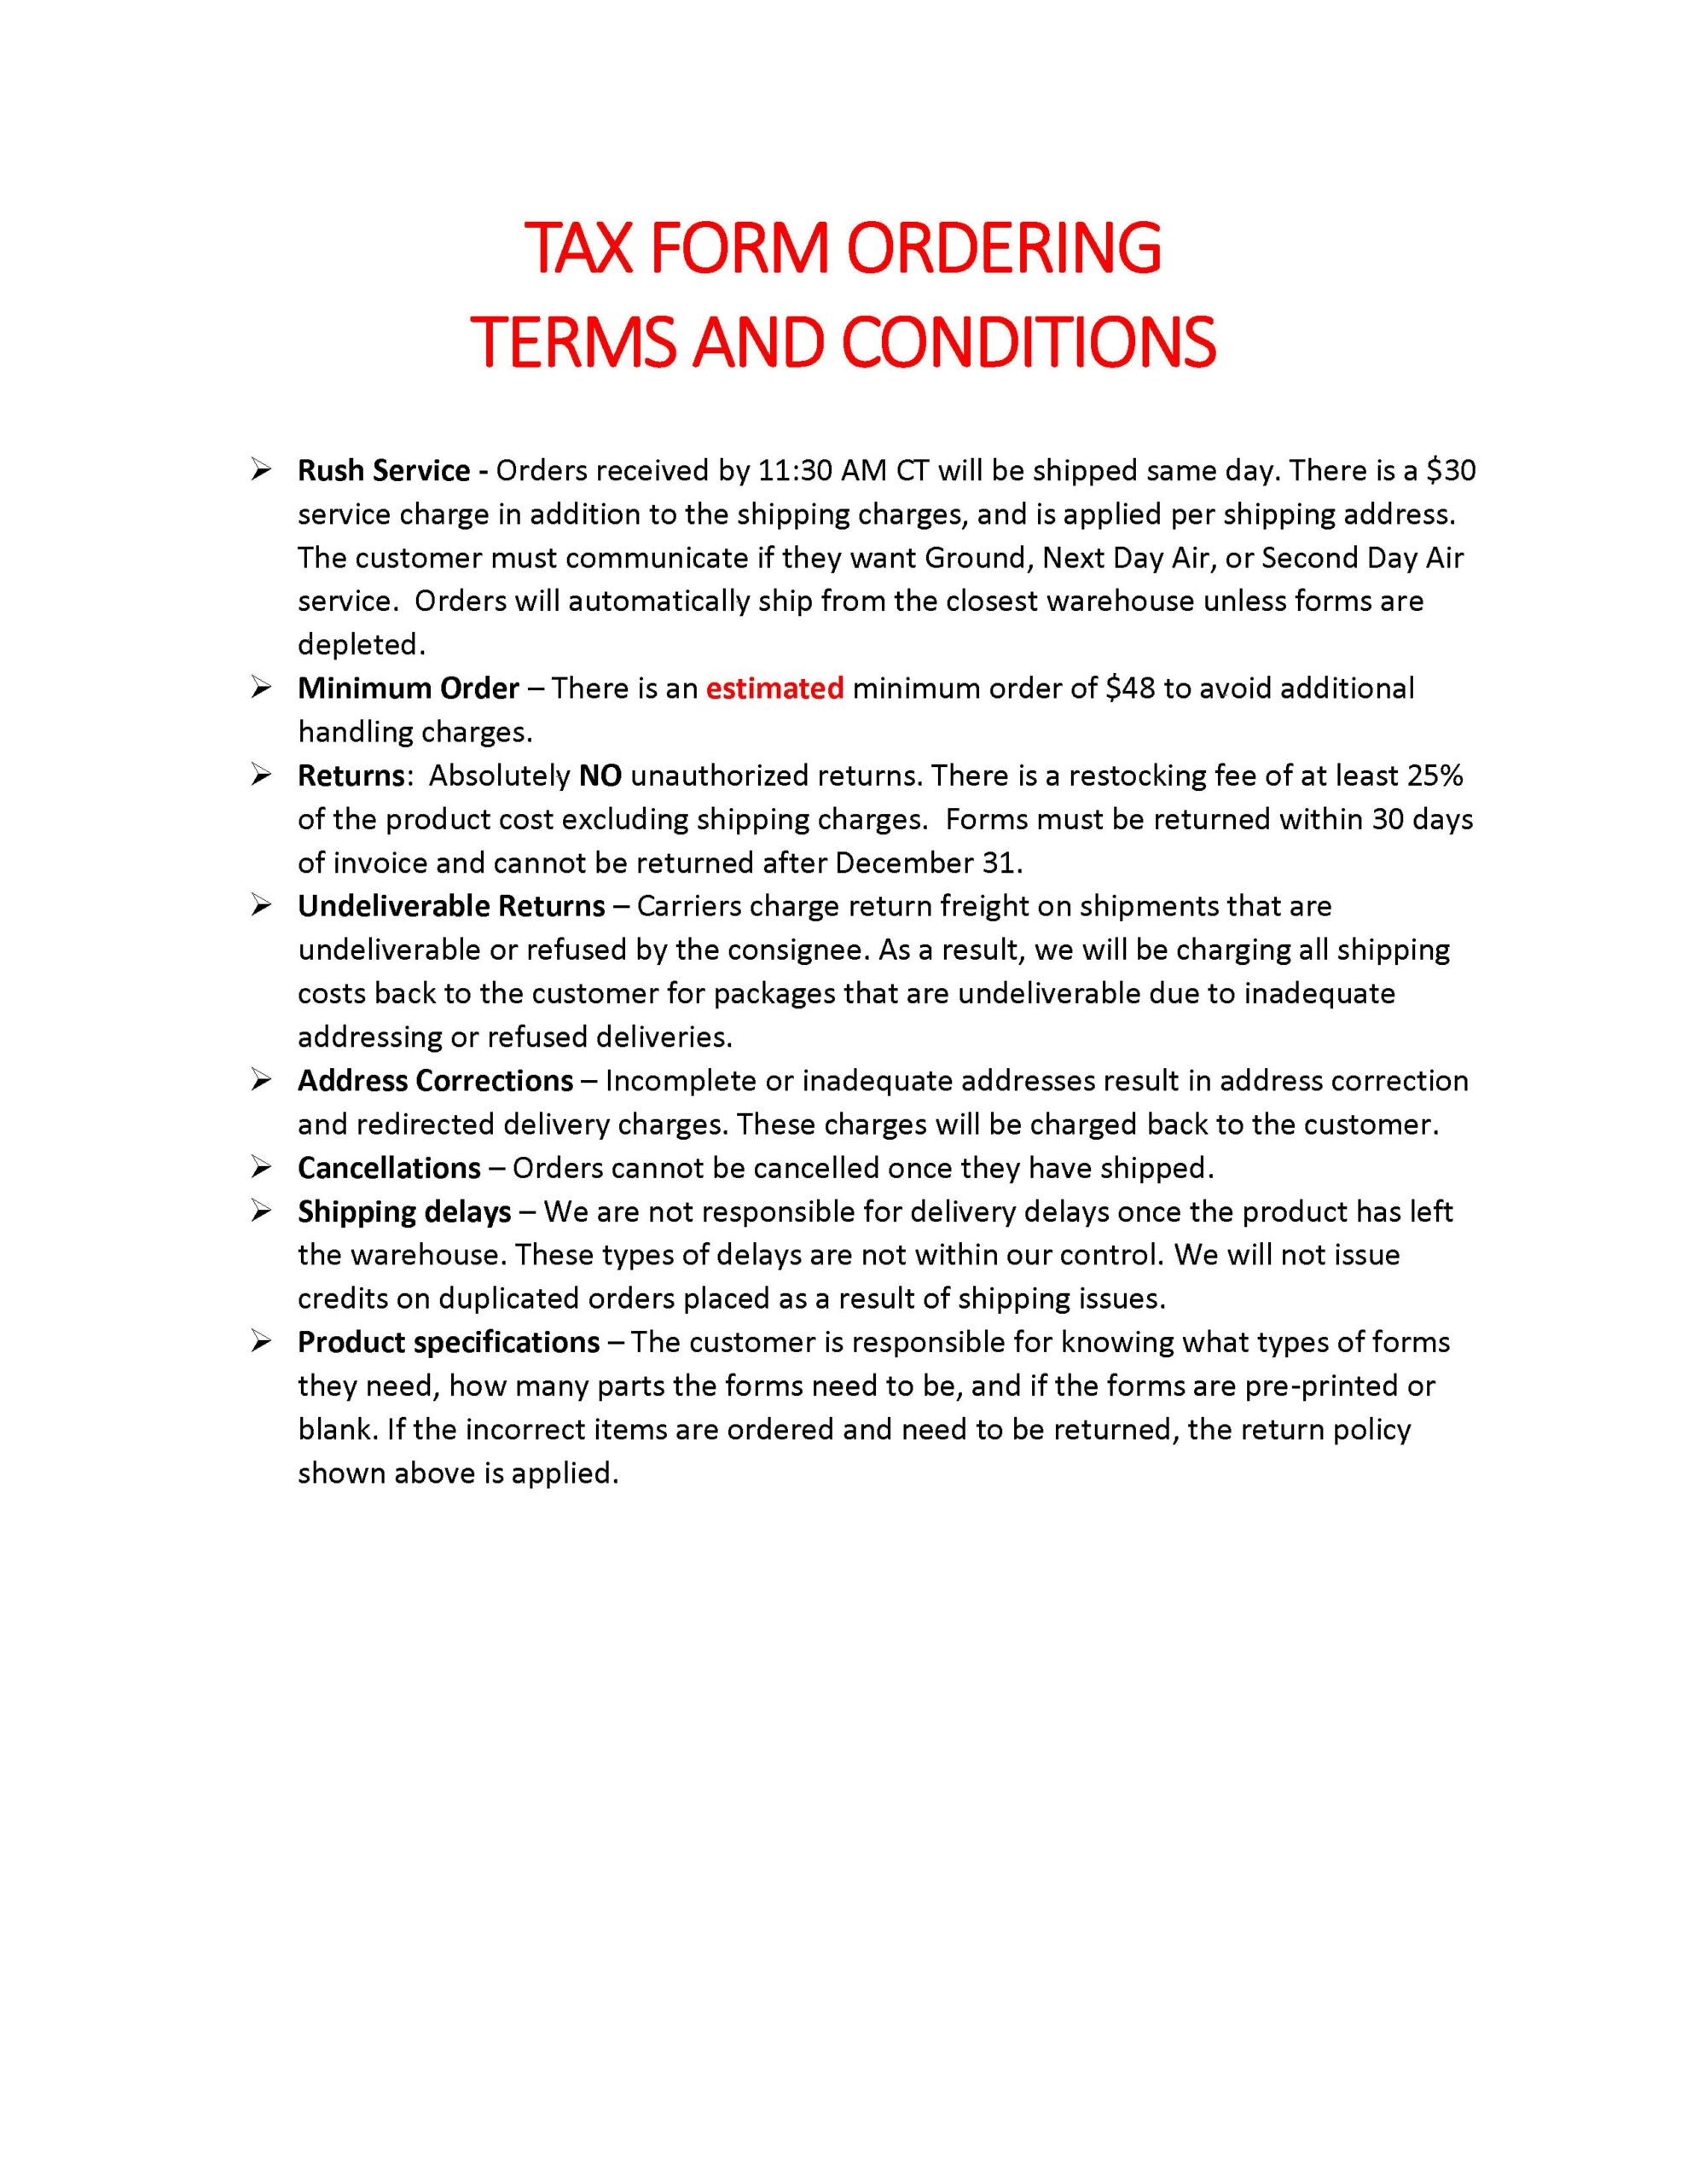 Tax Terms and Conditions